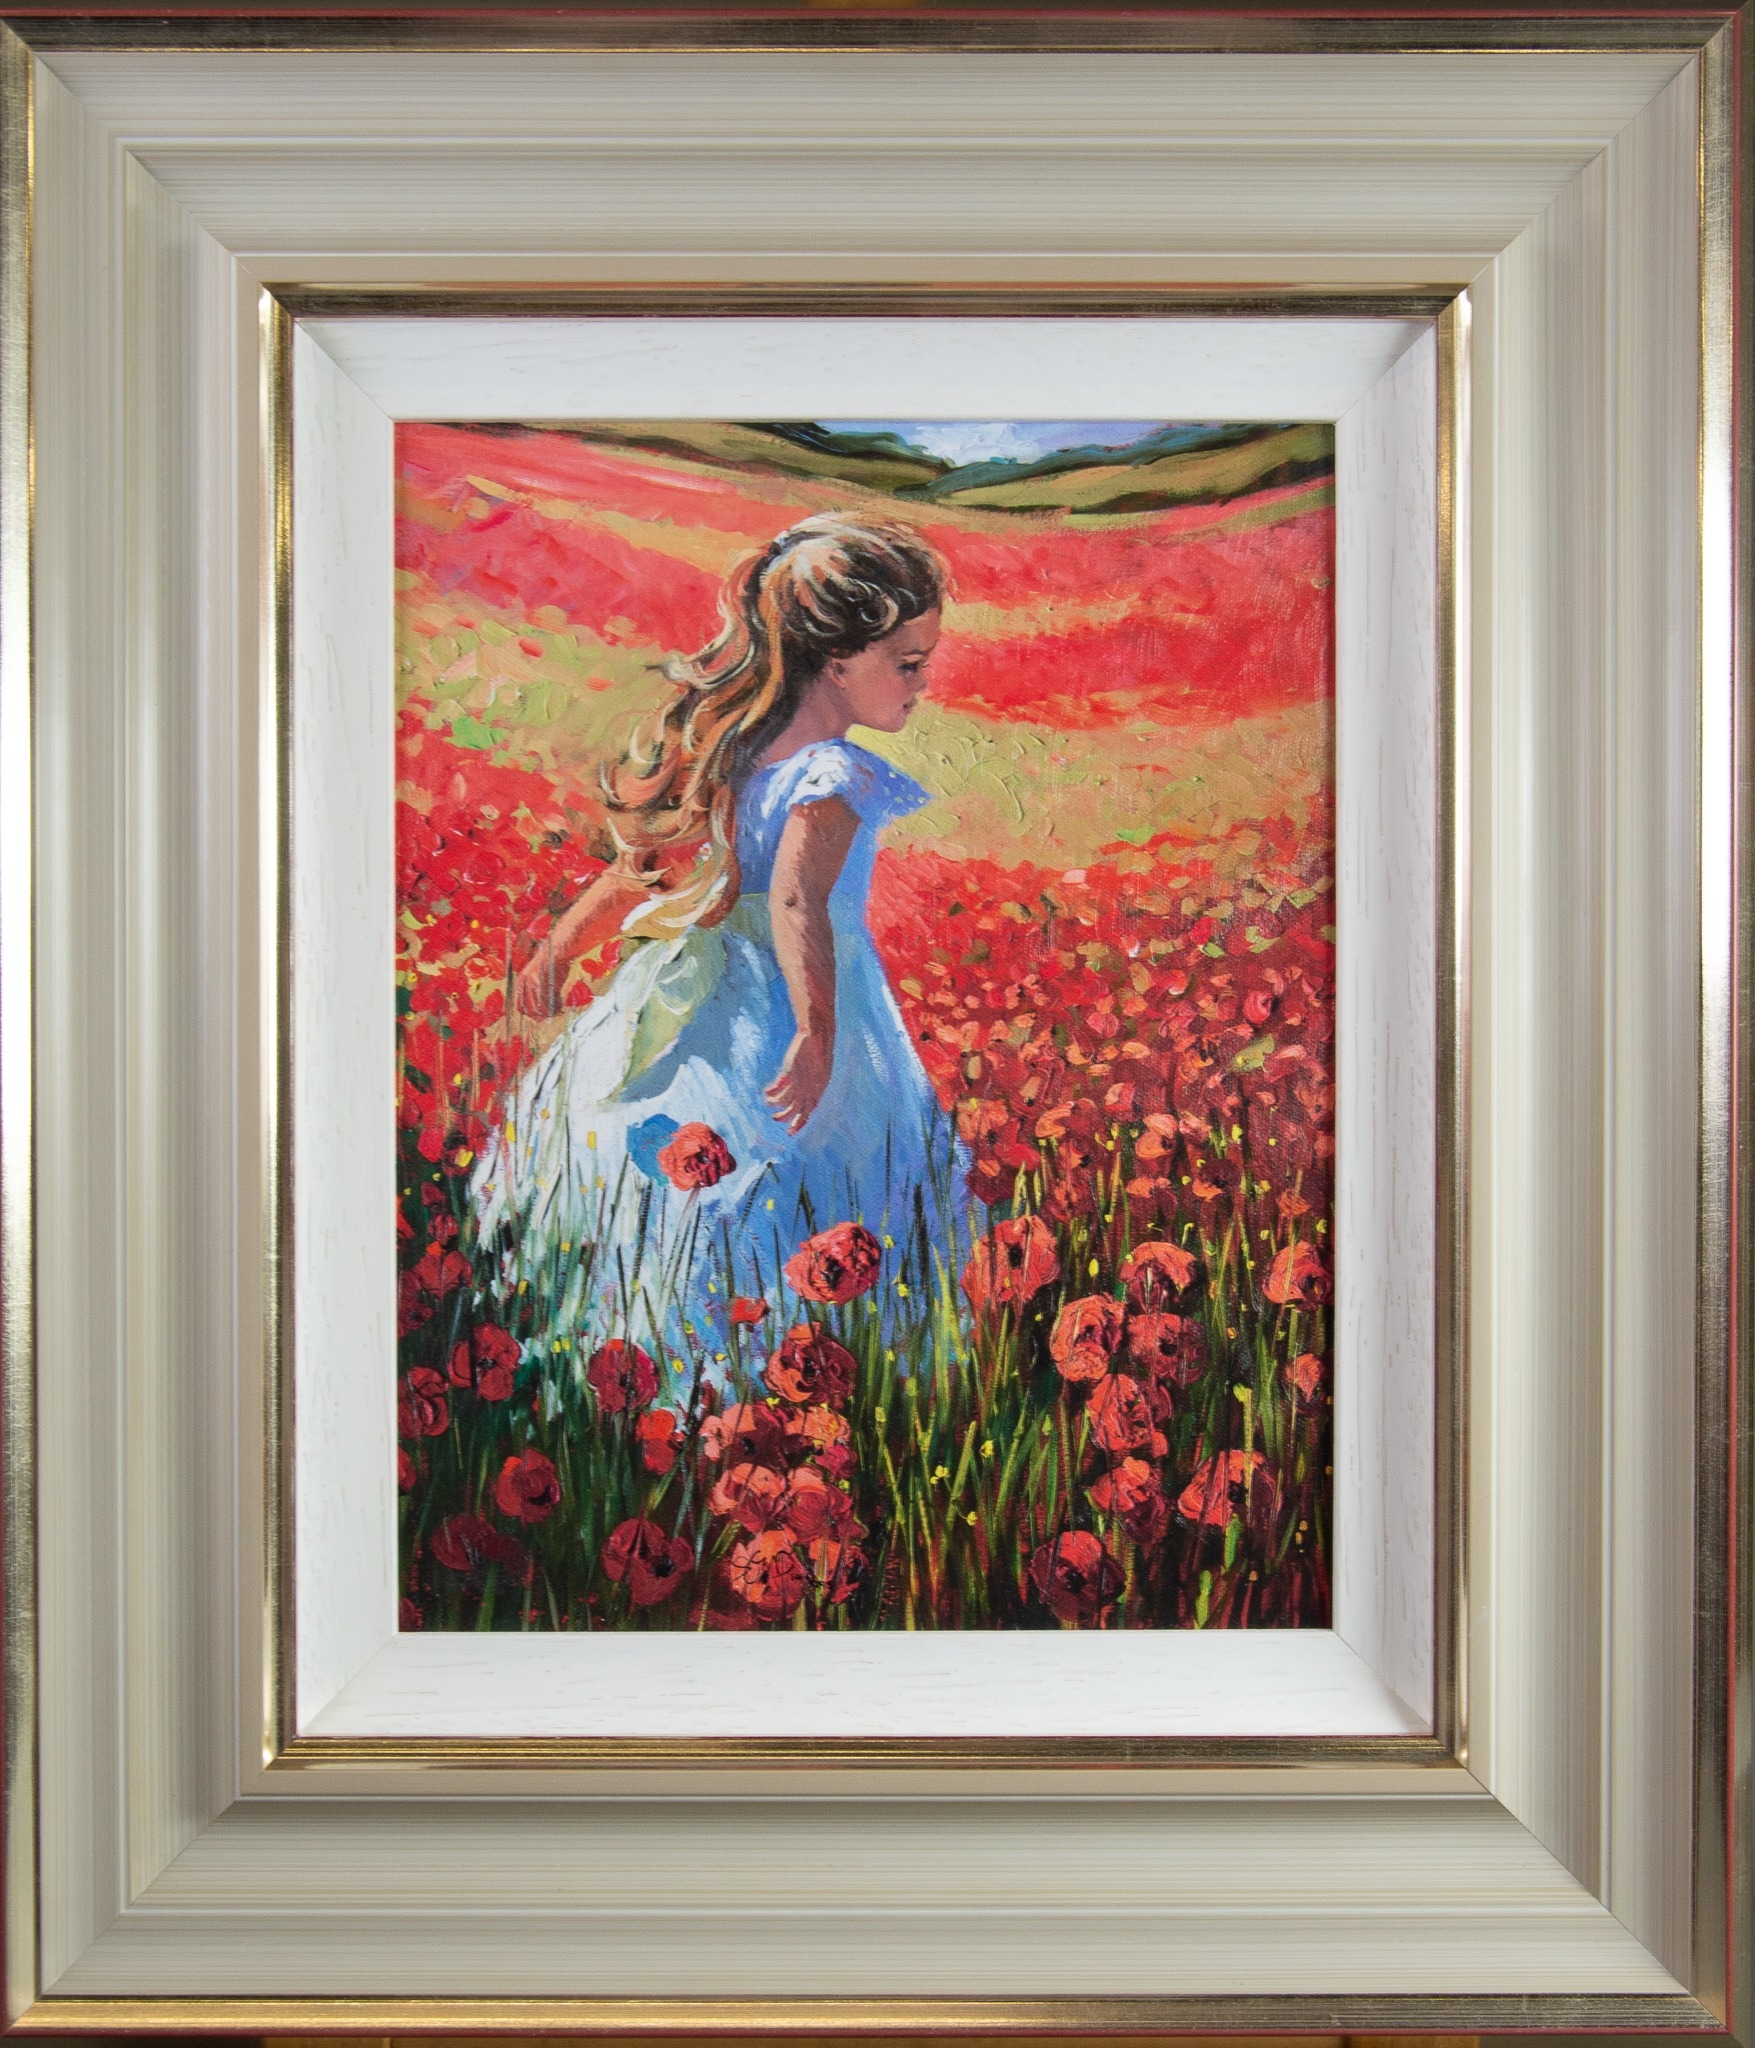 SHEREE VALENTINE DAINES (1959) ARTIST SIGNED LIMITED EDITION COLOUR PRINT ‘Summer Meadow’ (144/ - Image 2 of 2